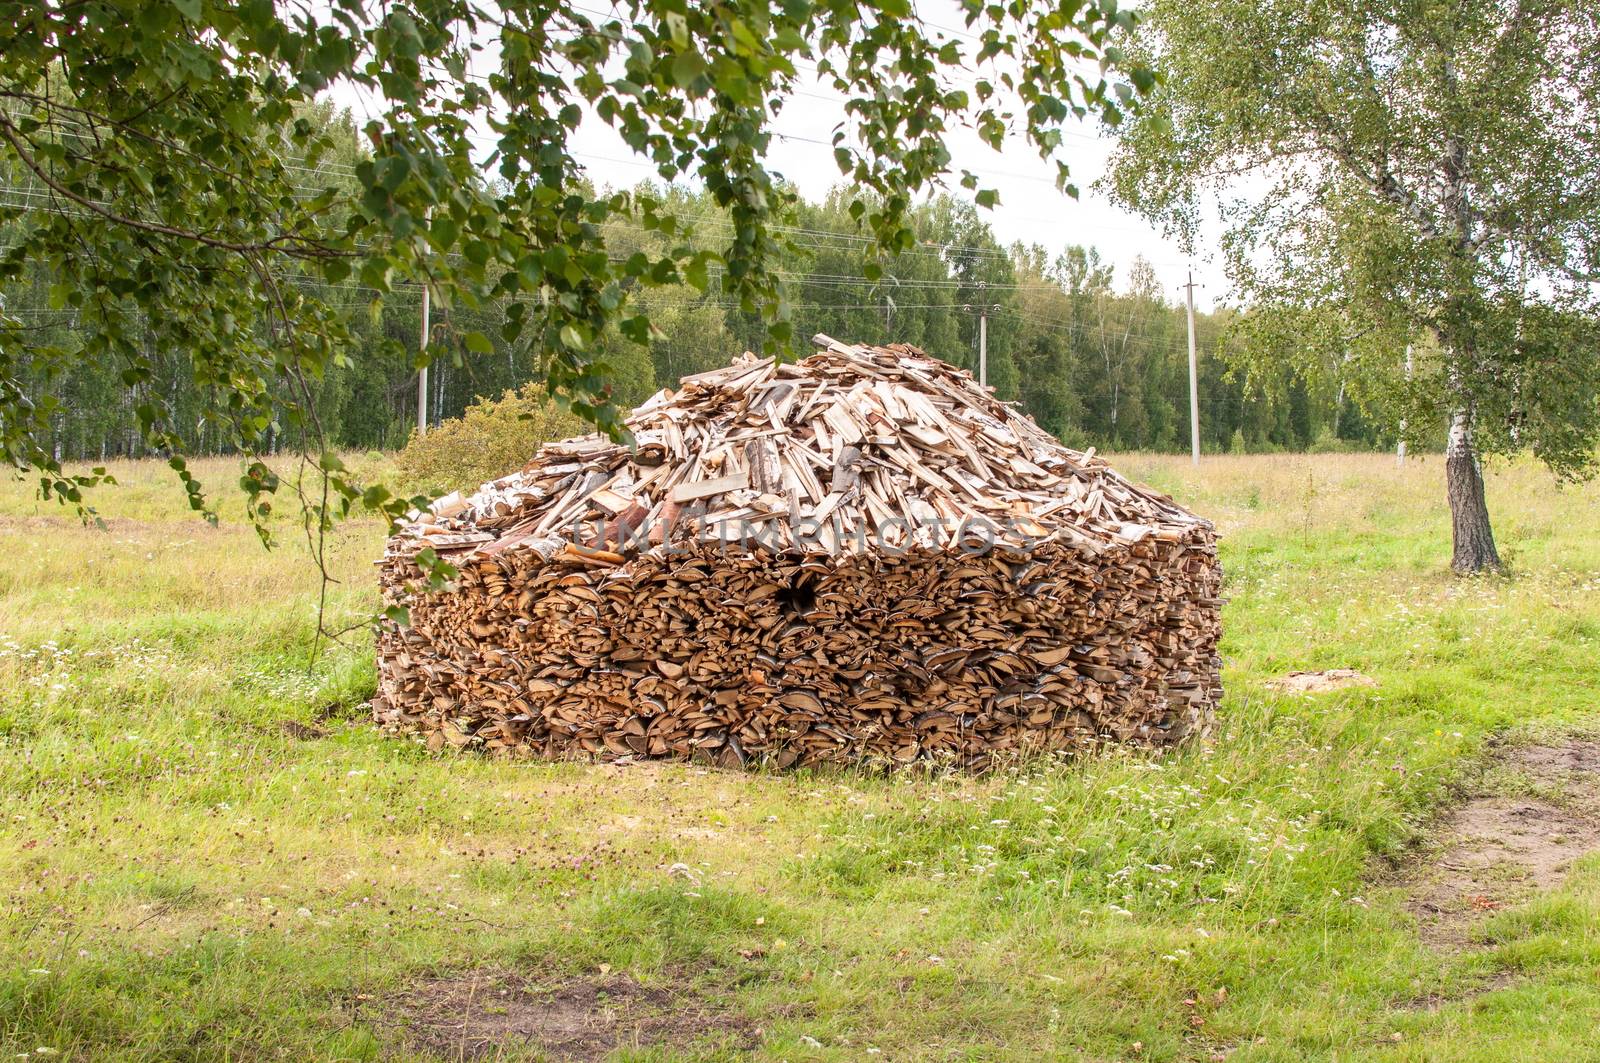 Stack of Firewood in Forest Glade by alexcoolok